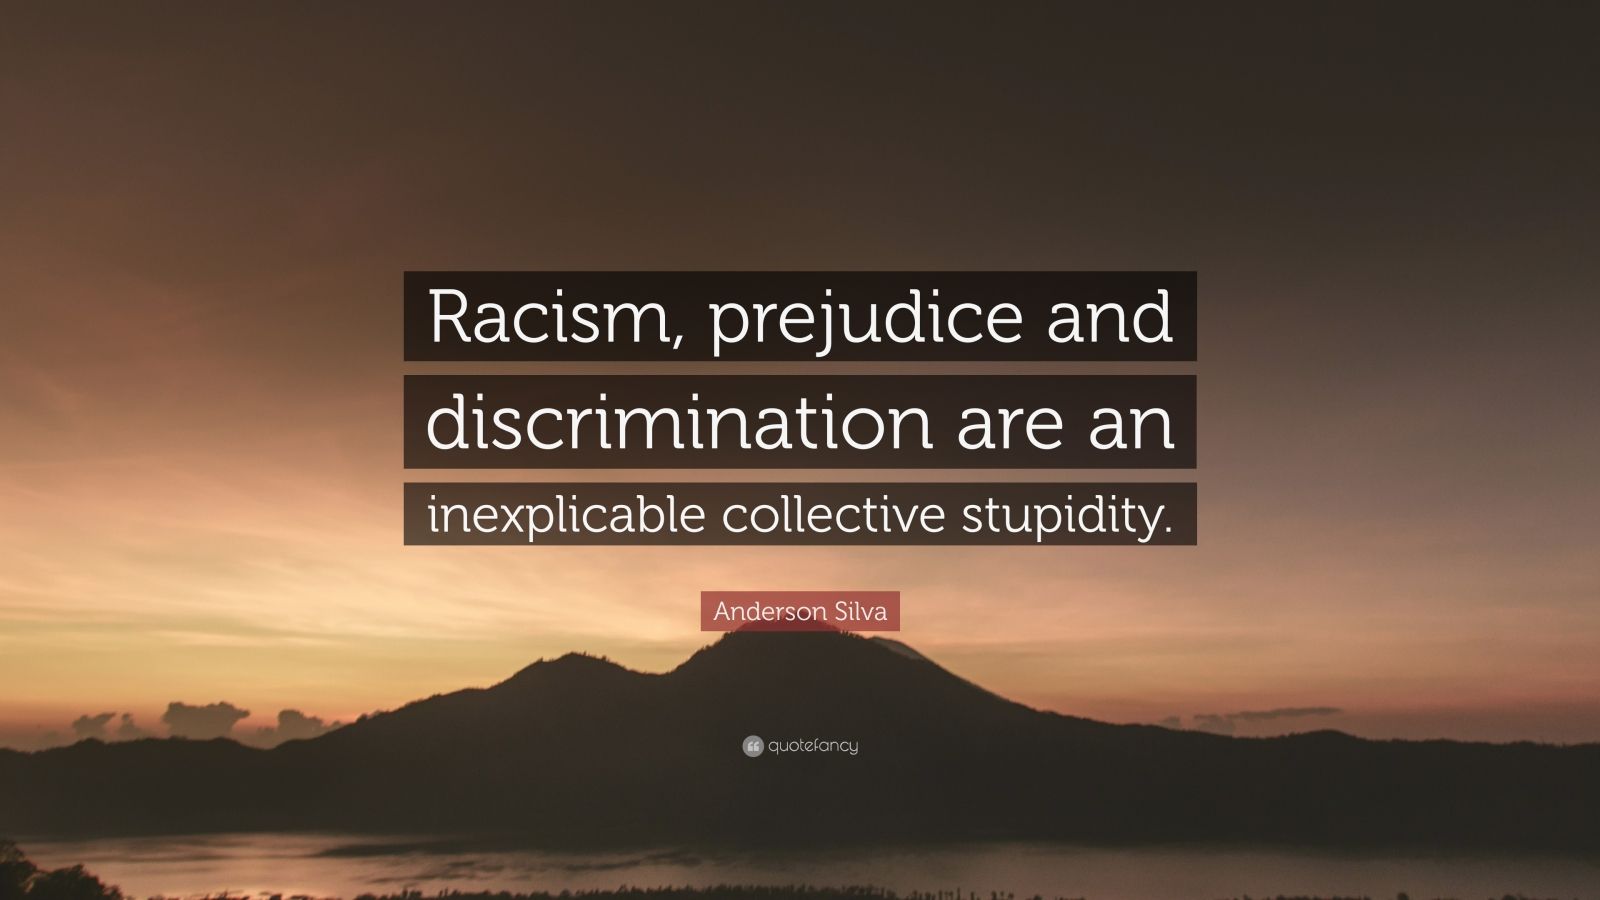 Anderson Silva Quote: “Racism, prejudice and discrimination are an